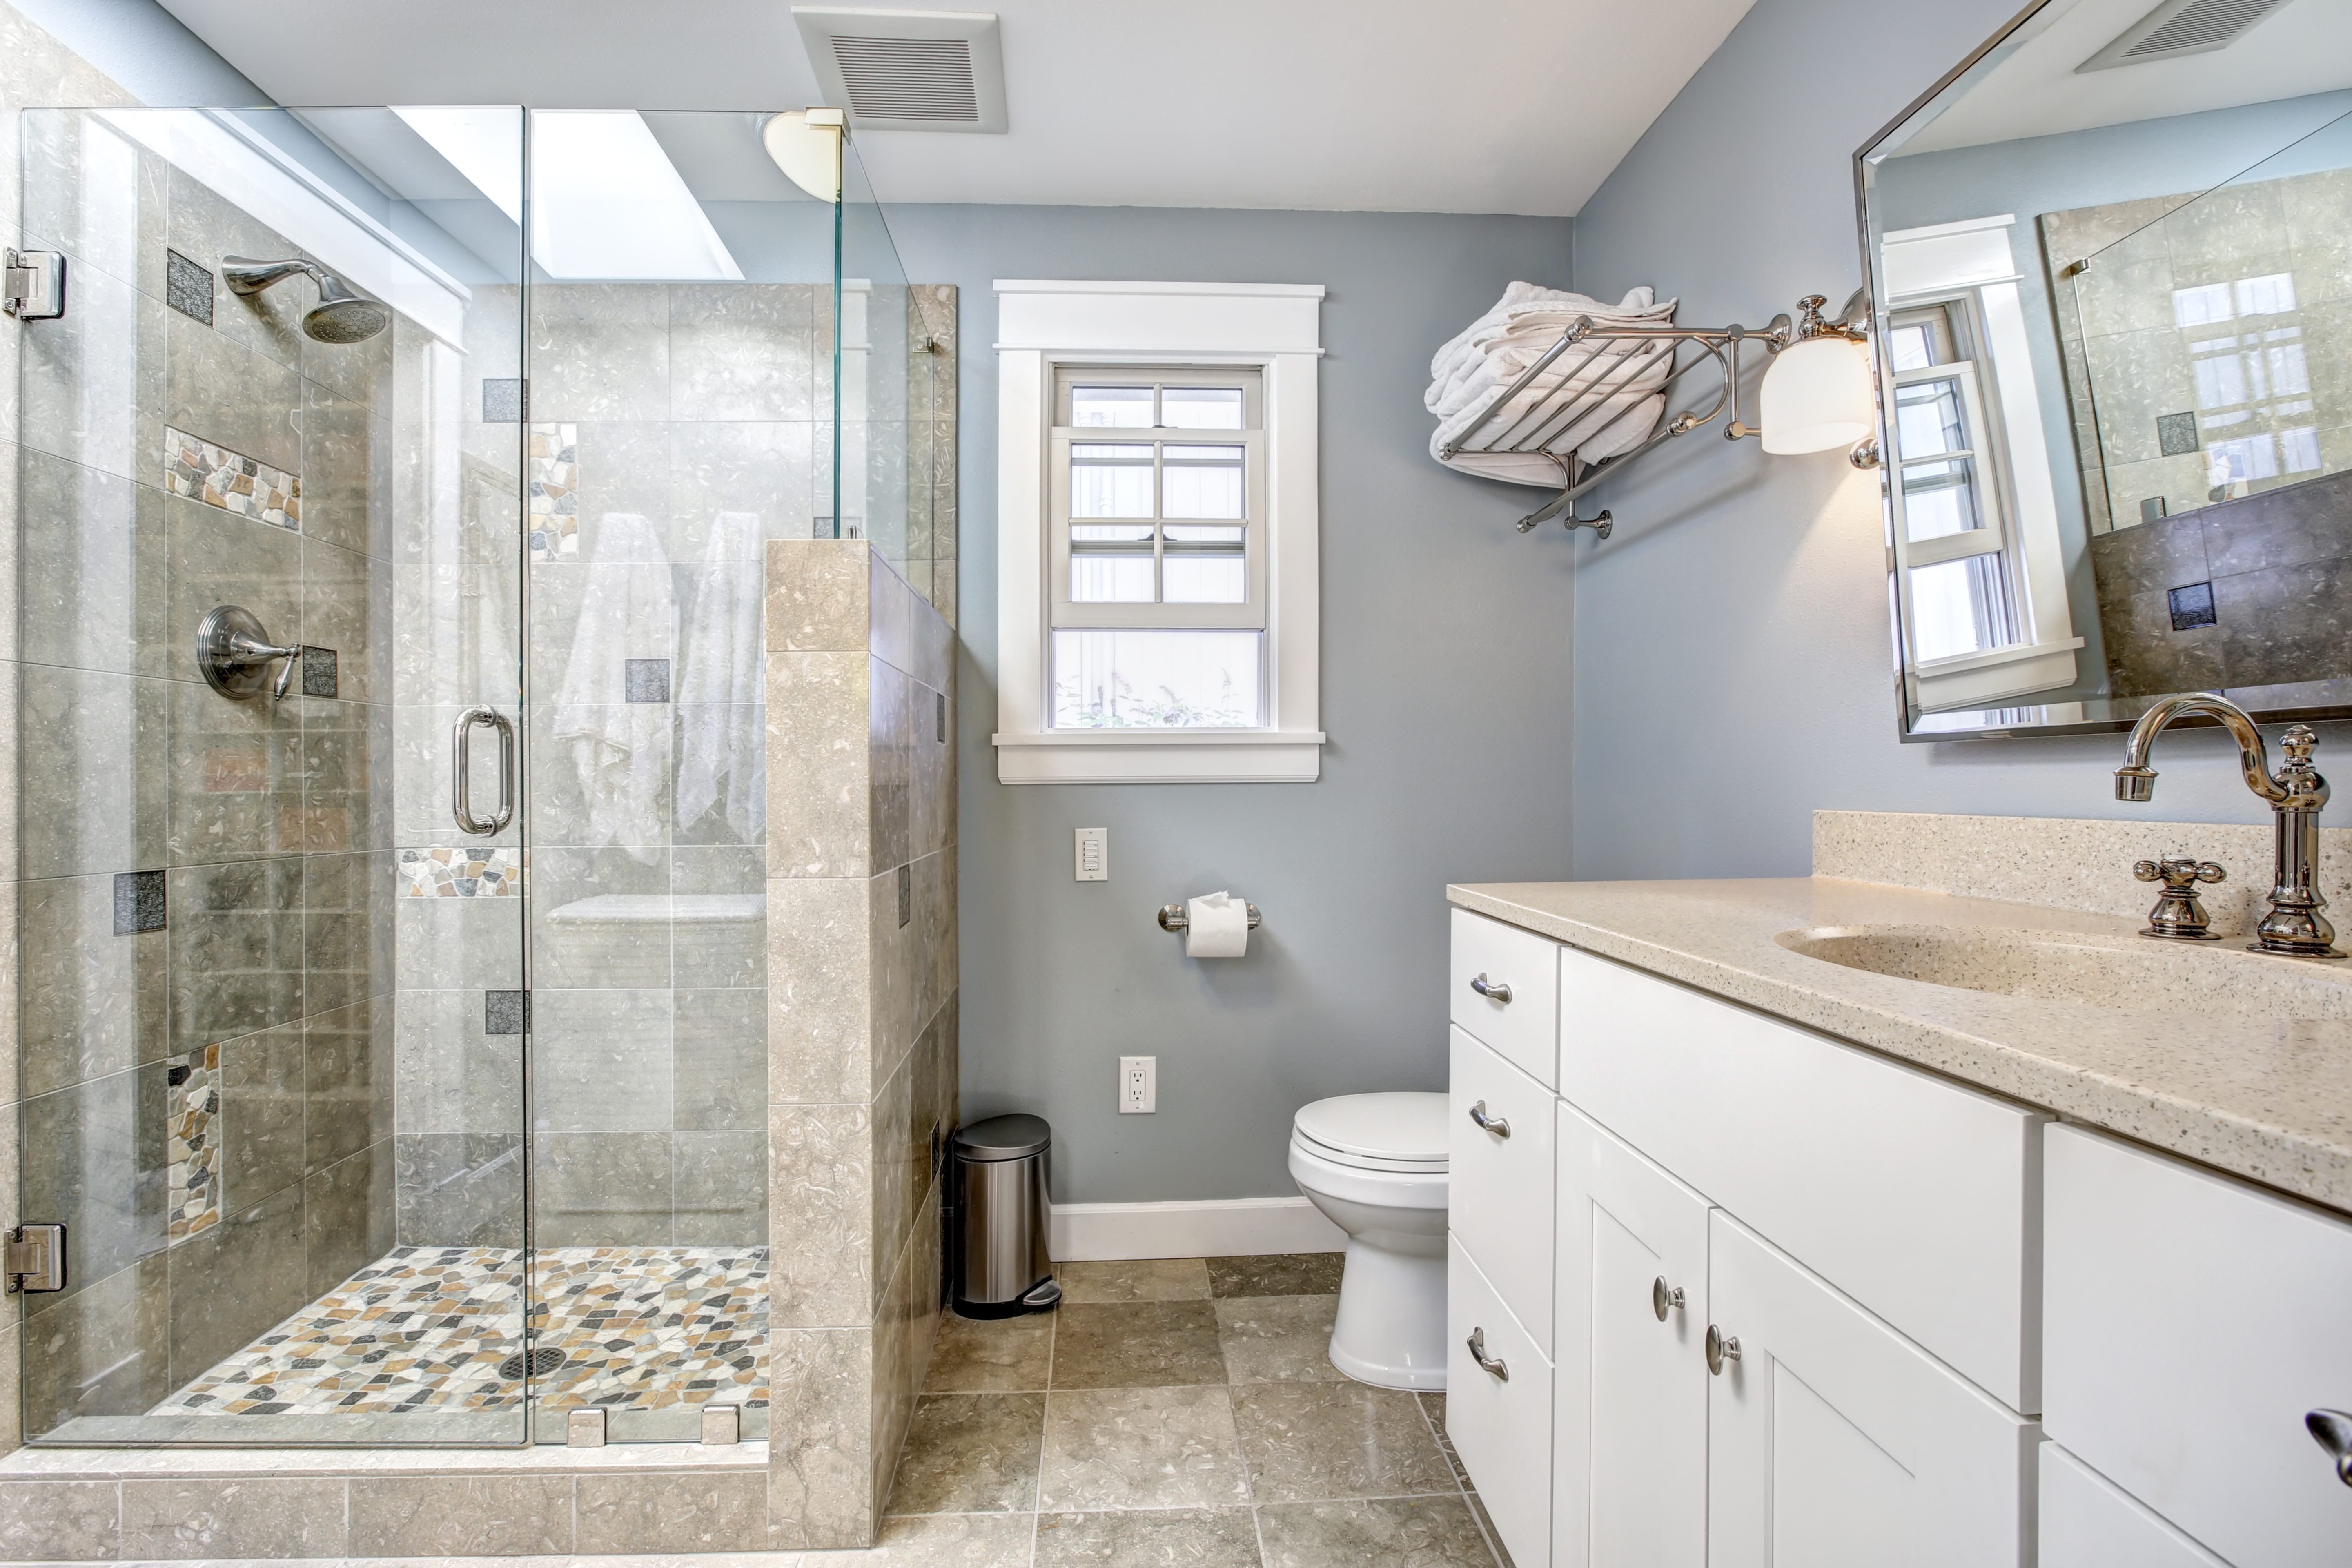 The Ins and Outs of Updating Your Master Bathroom